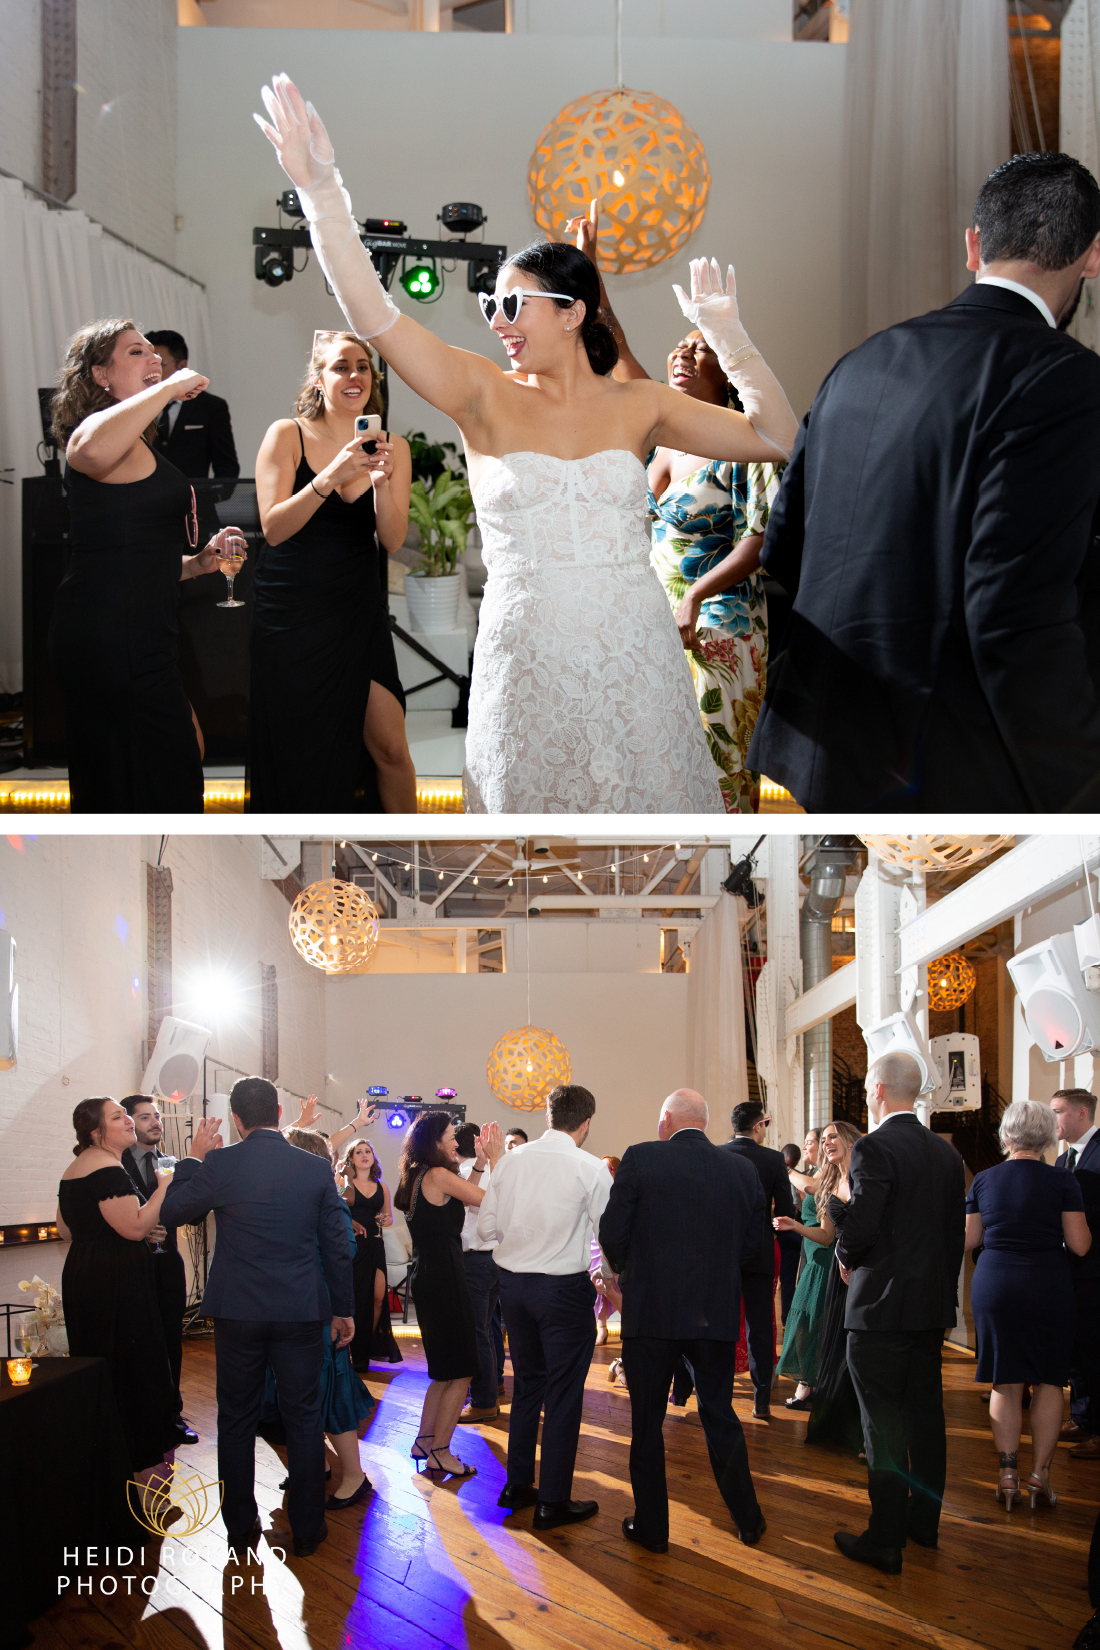 Bride wearing sheer gloves and heart shaped glasses dancing on wedding day